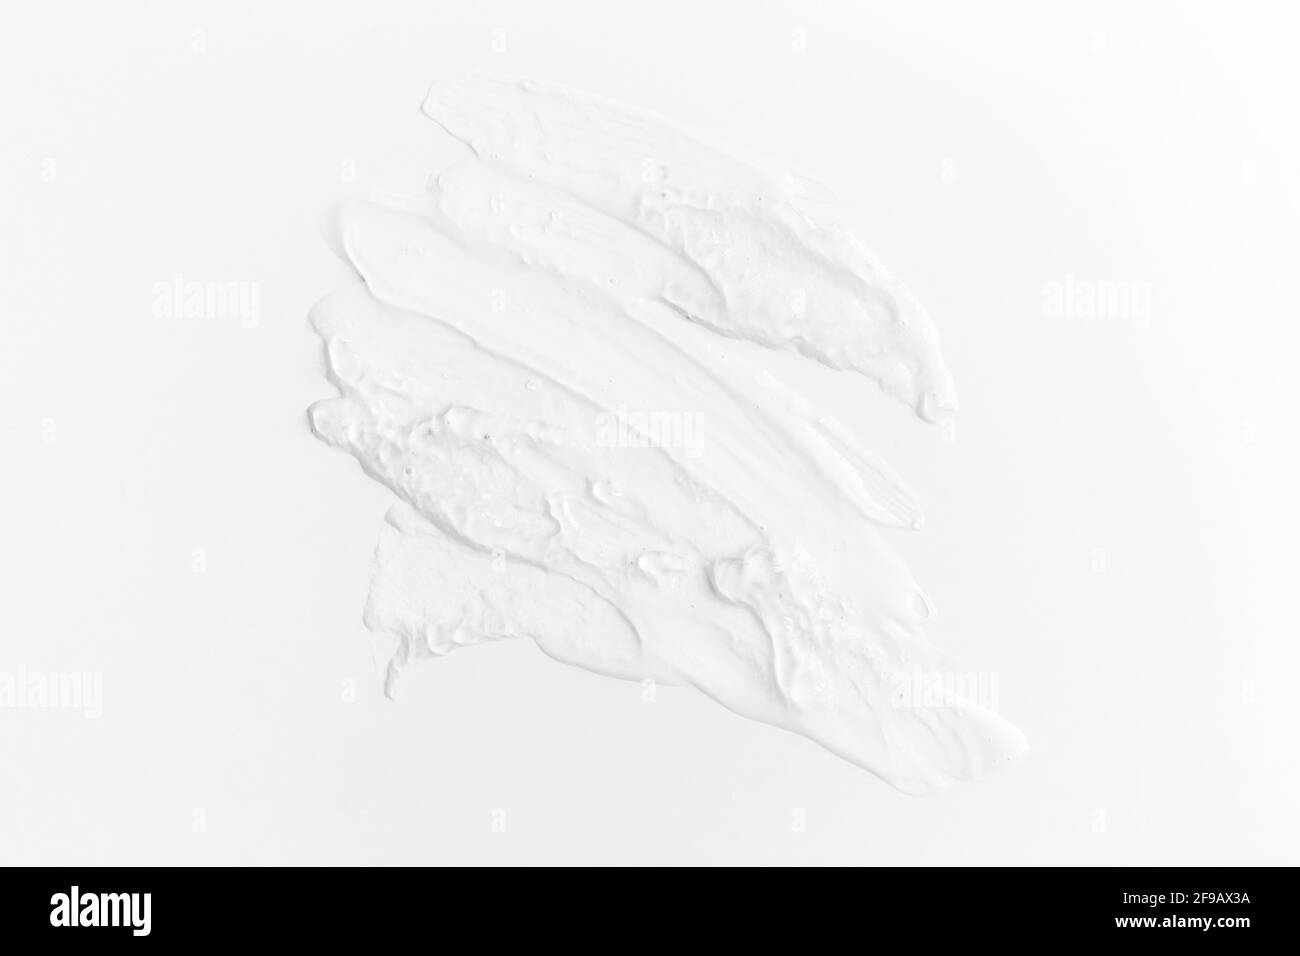 Textures from cosmetics. Smears from transparent aloe vera cream on white table Stock Photo